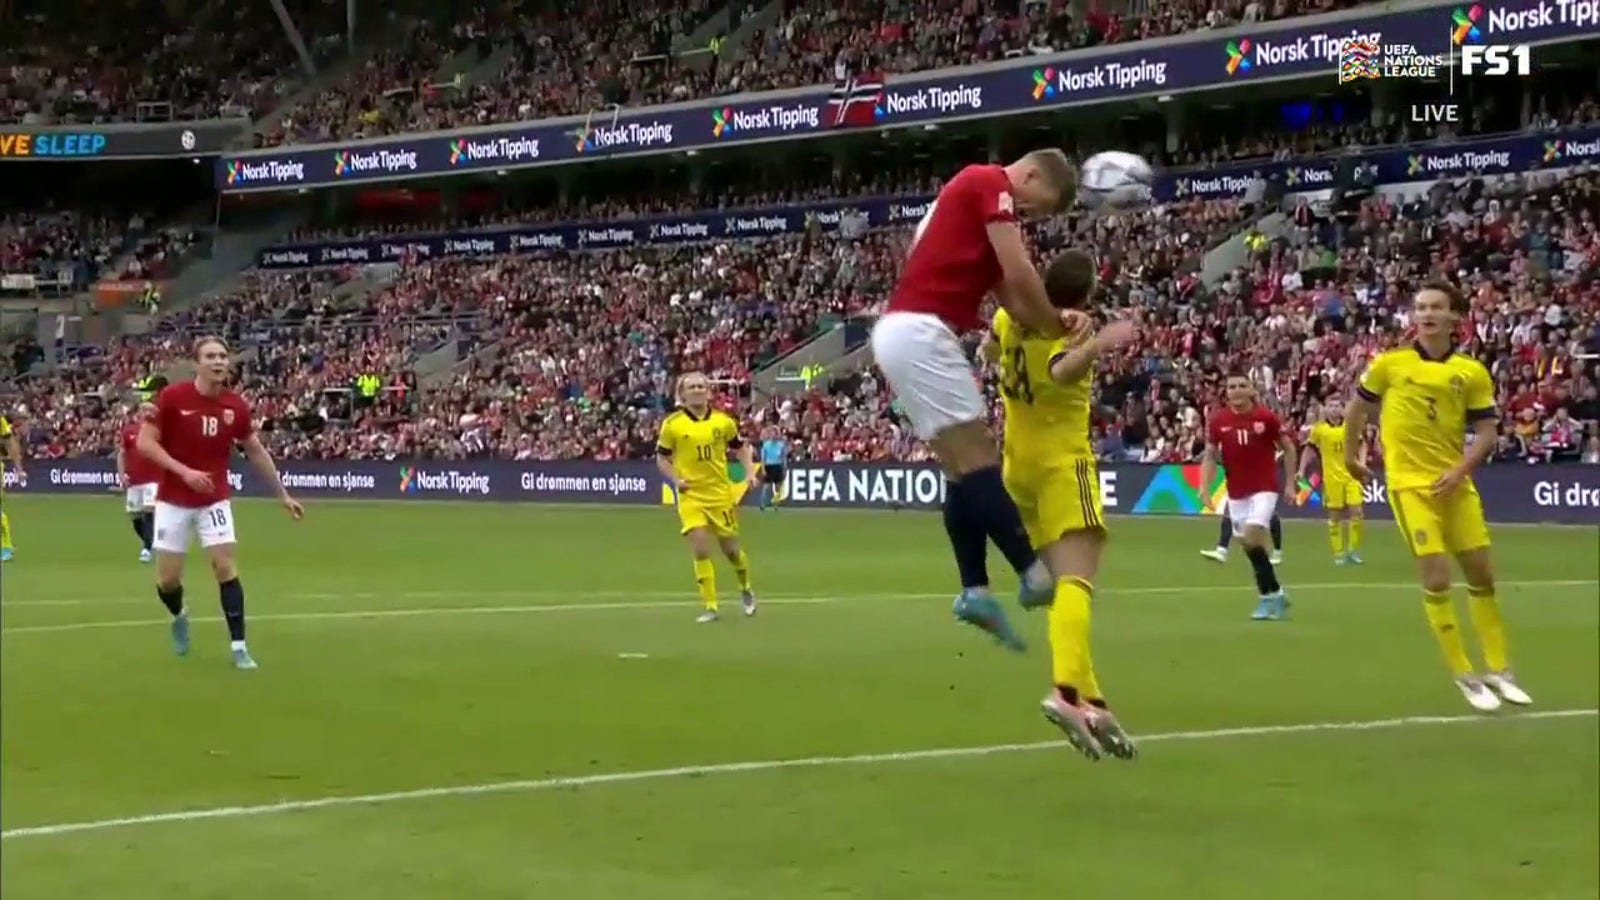 Alexander Sørloth rises for the header to extend Norway's lead